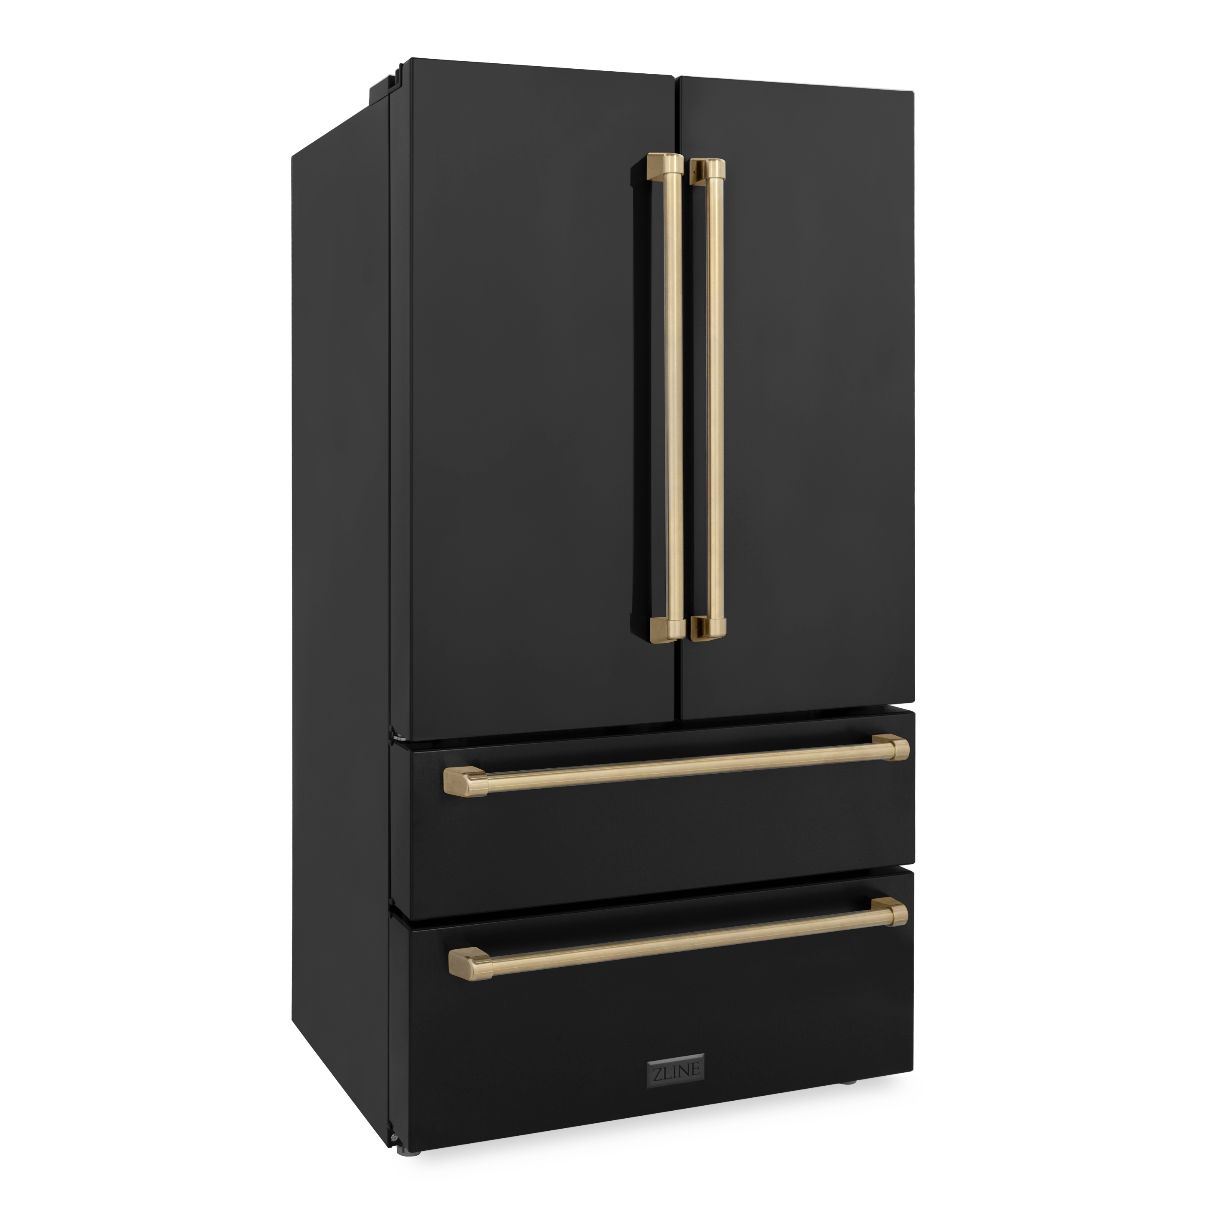 ZLINE Autograph Edition 36 in. 22.5 cu. ft Freestanding French Door Refrigerator with Ice Maker in Fingerprint Resistant Black Stainless Steel with Champagne Bronze Accents (RFMZ-36-BS-CB)